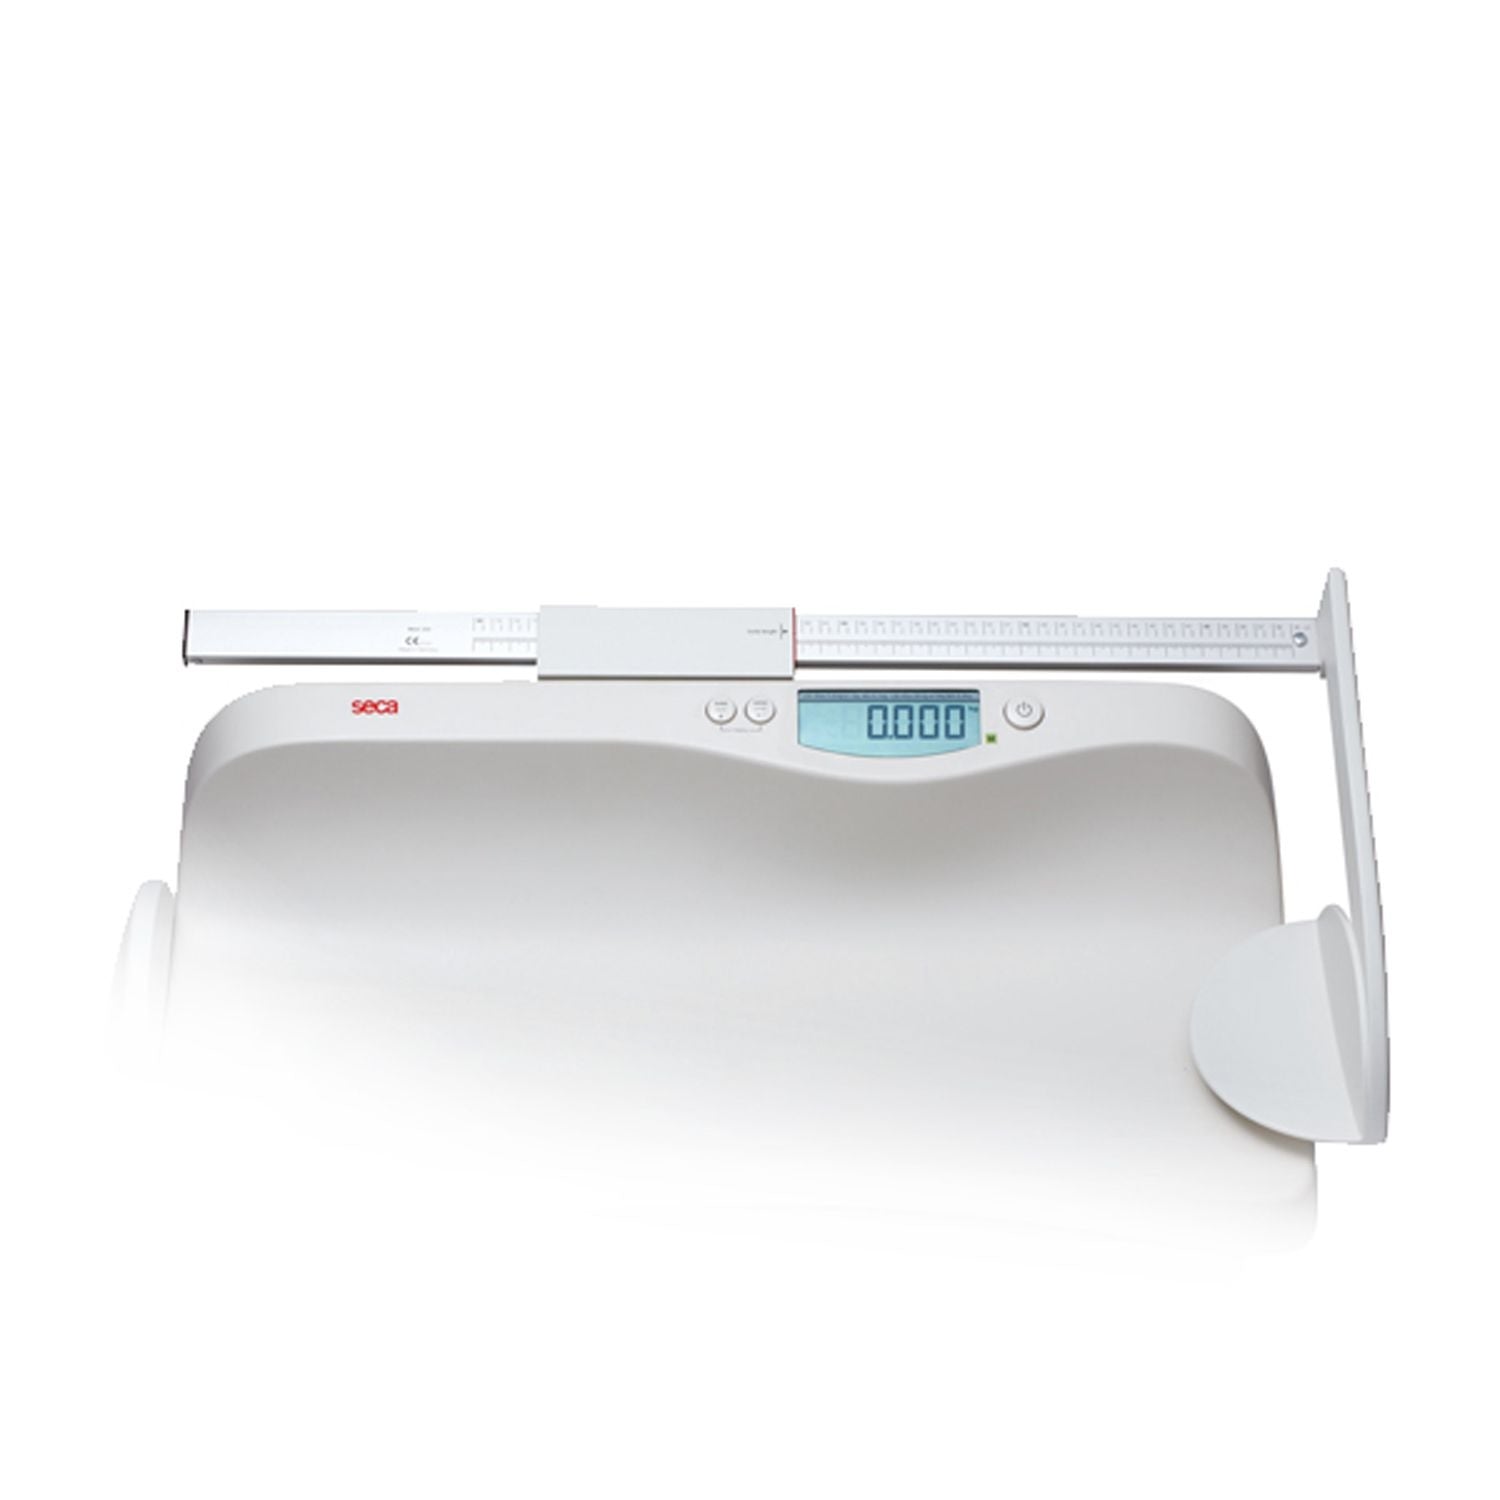 seca 233 Measuring Rod for seca 376 Baby Scales (Analogue)